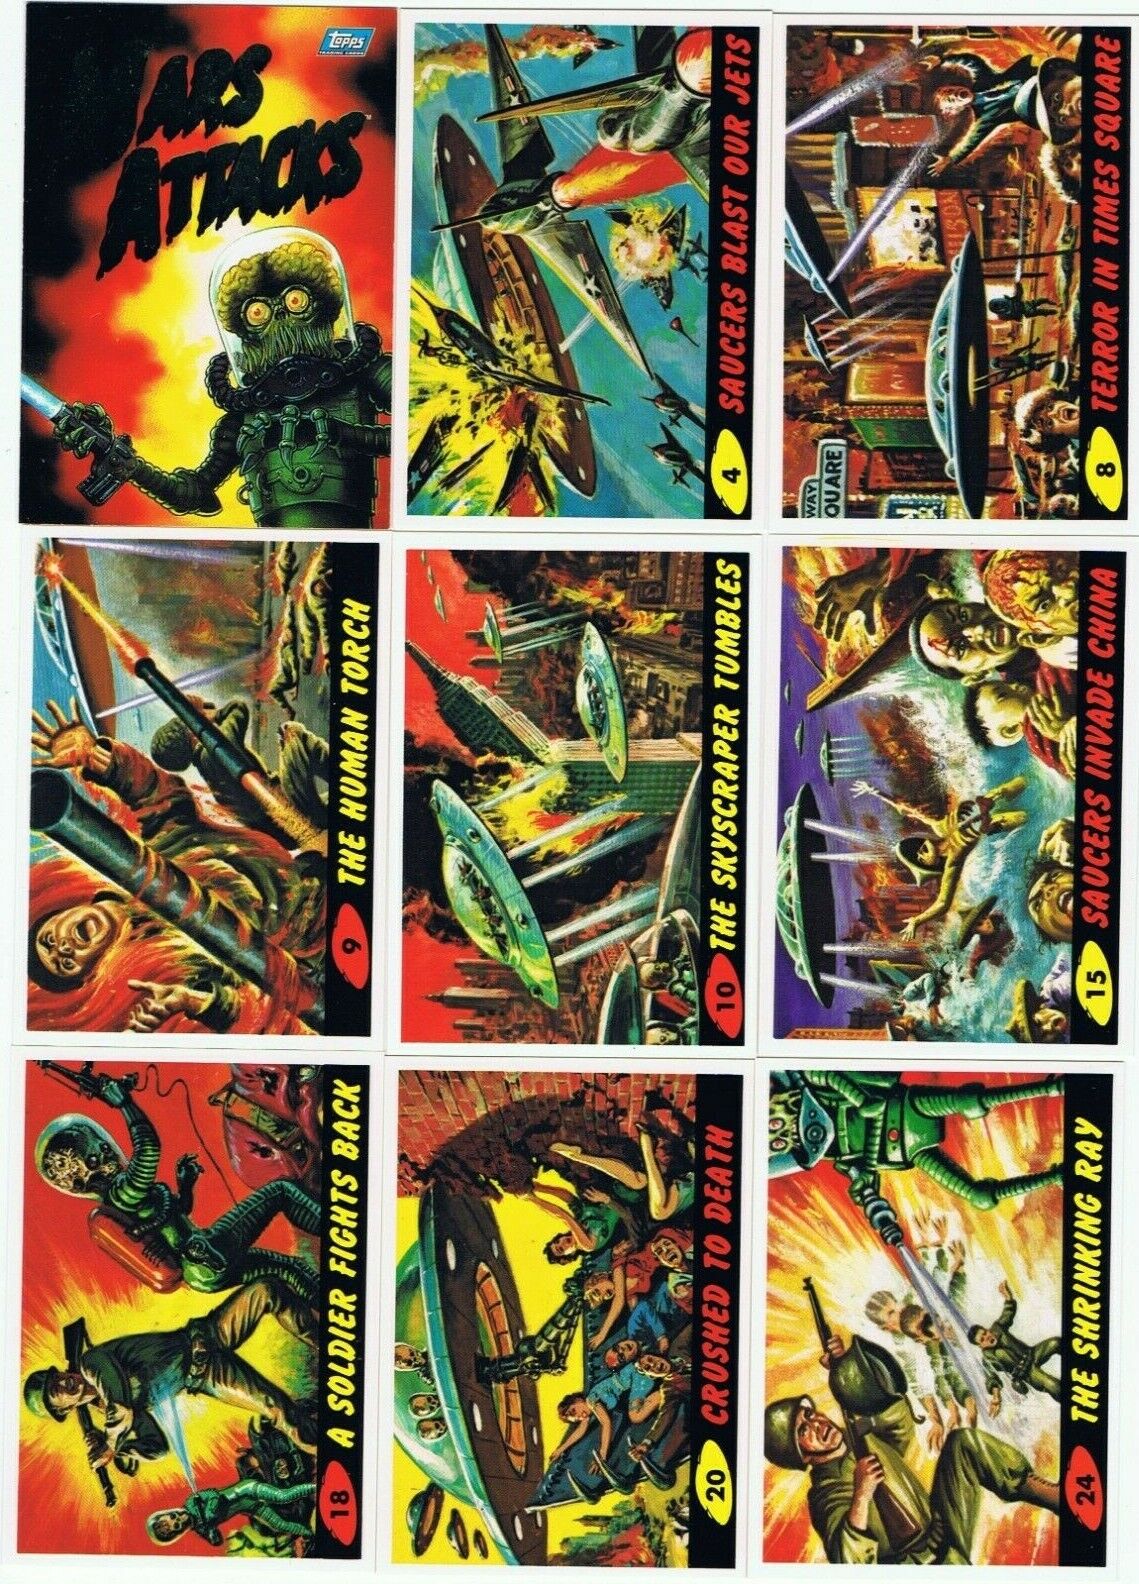 1994 Mars Attacks Archives by Topps. SINGLE CARDS $1 &$2 each+Discounts+Inserts